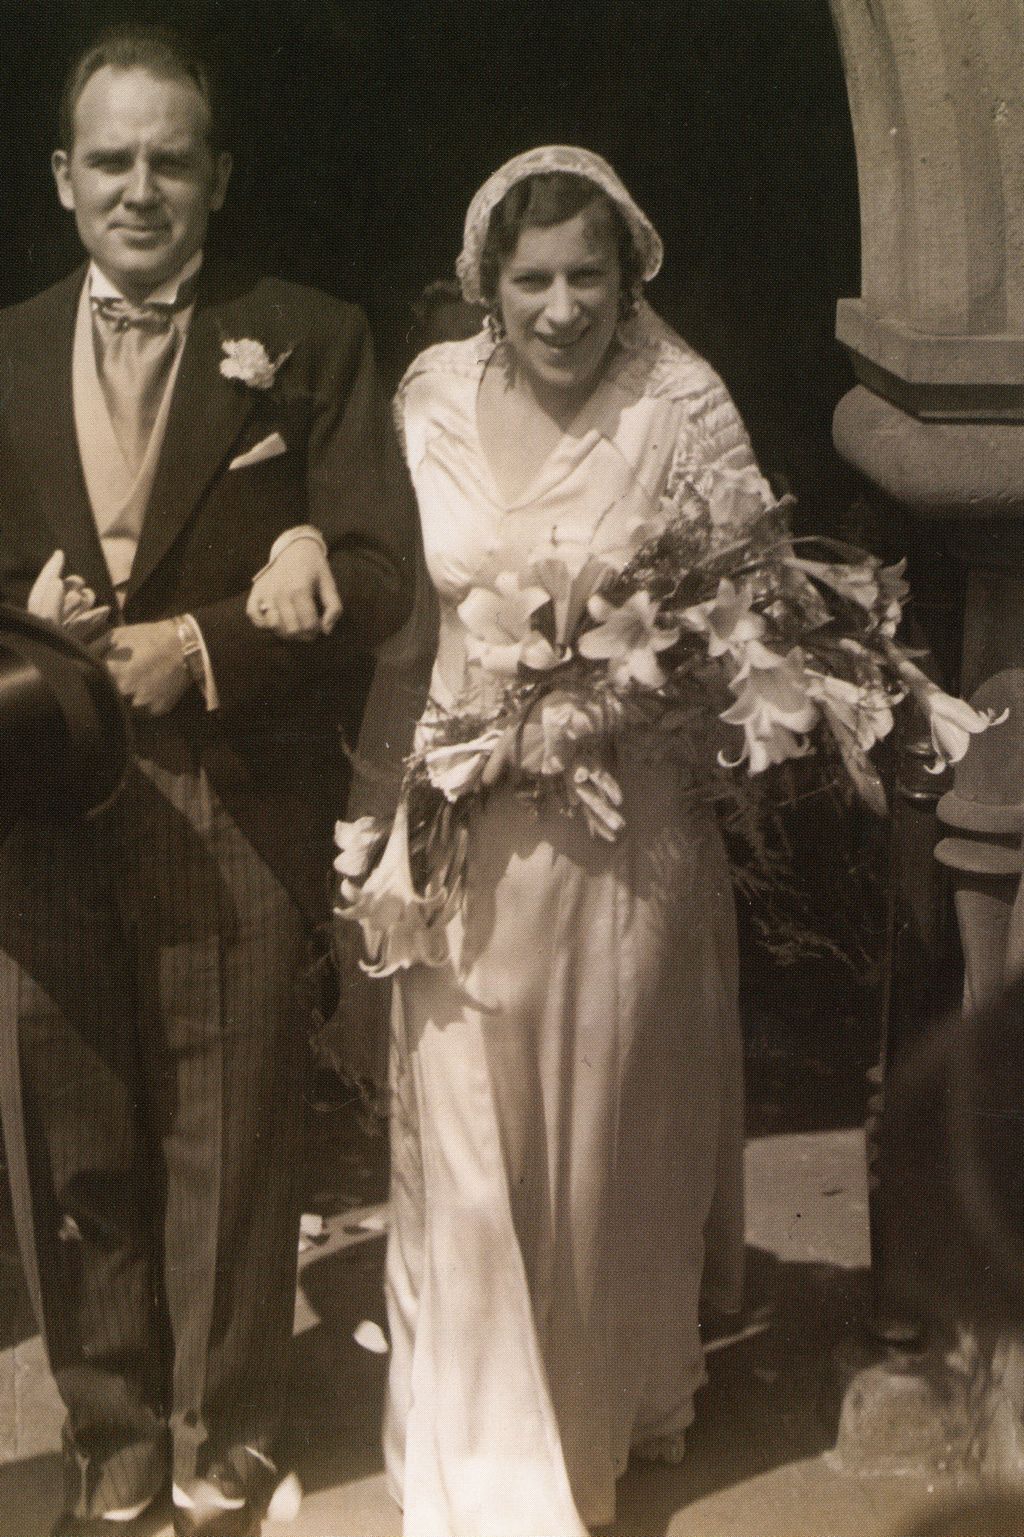 A black and white wedding photo of Dr. Everett Deryberry and Joan Pitt Rew Derryberry